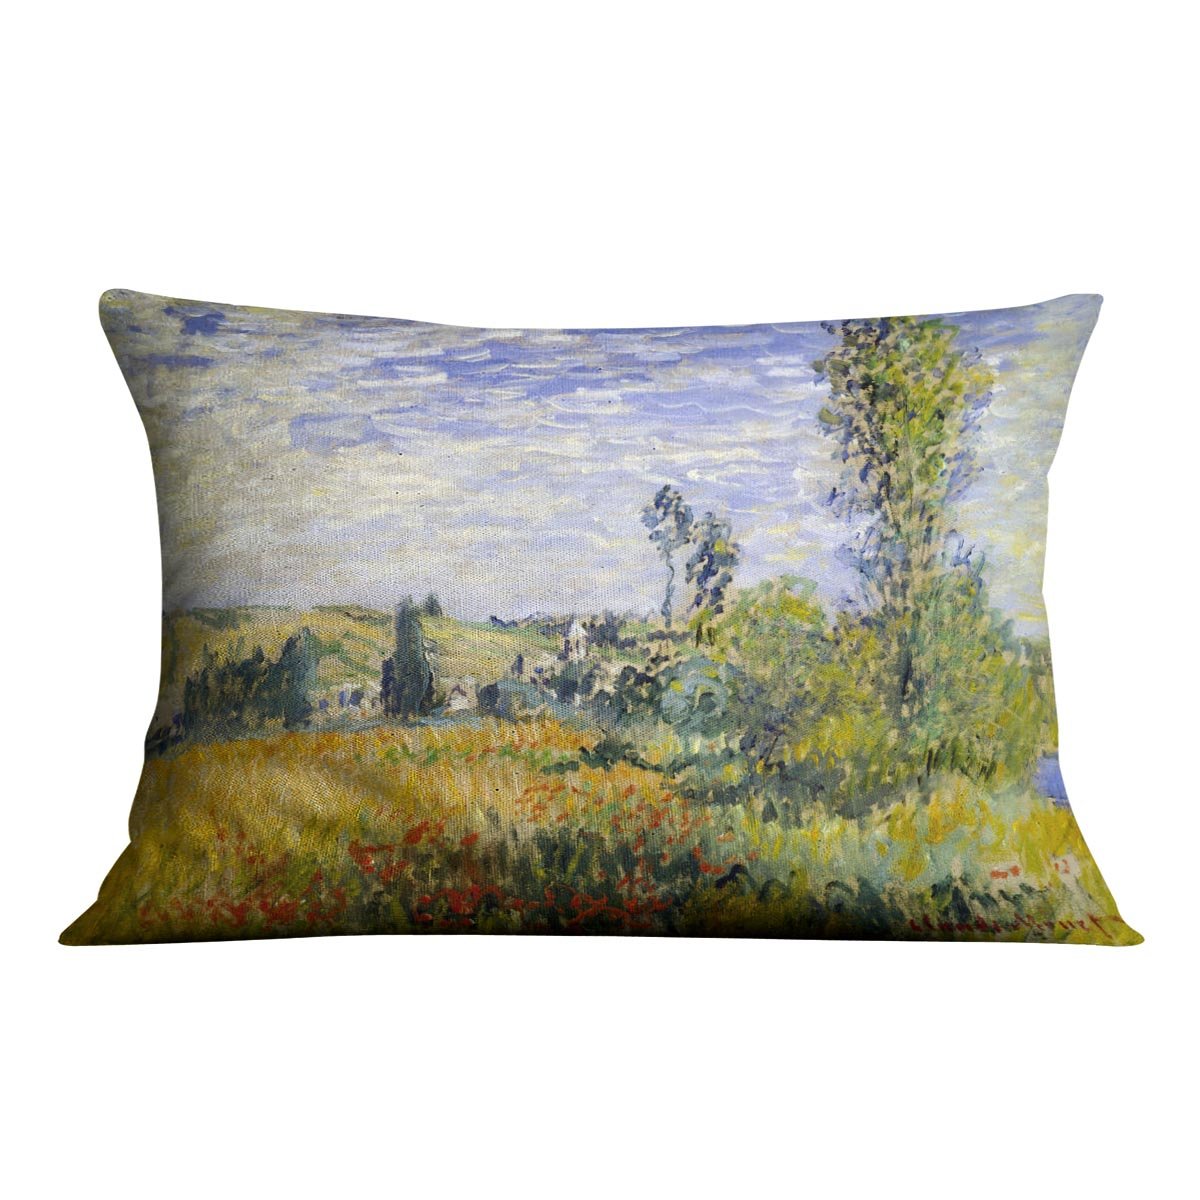 Vetheuil by Monet Throw Pillow